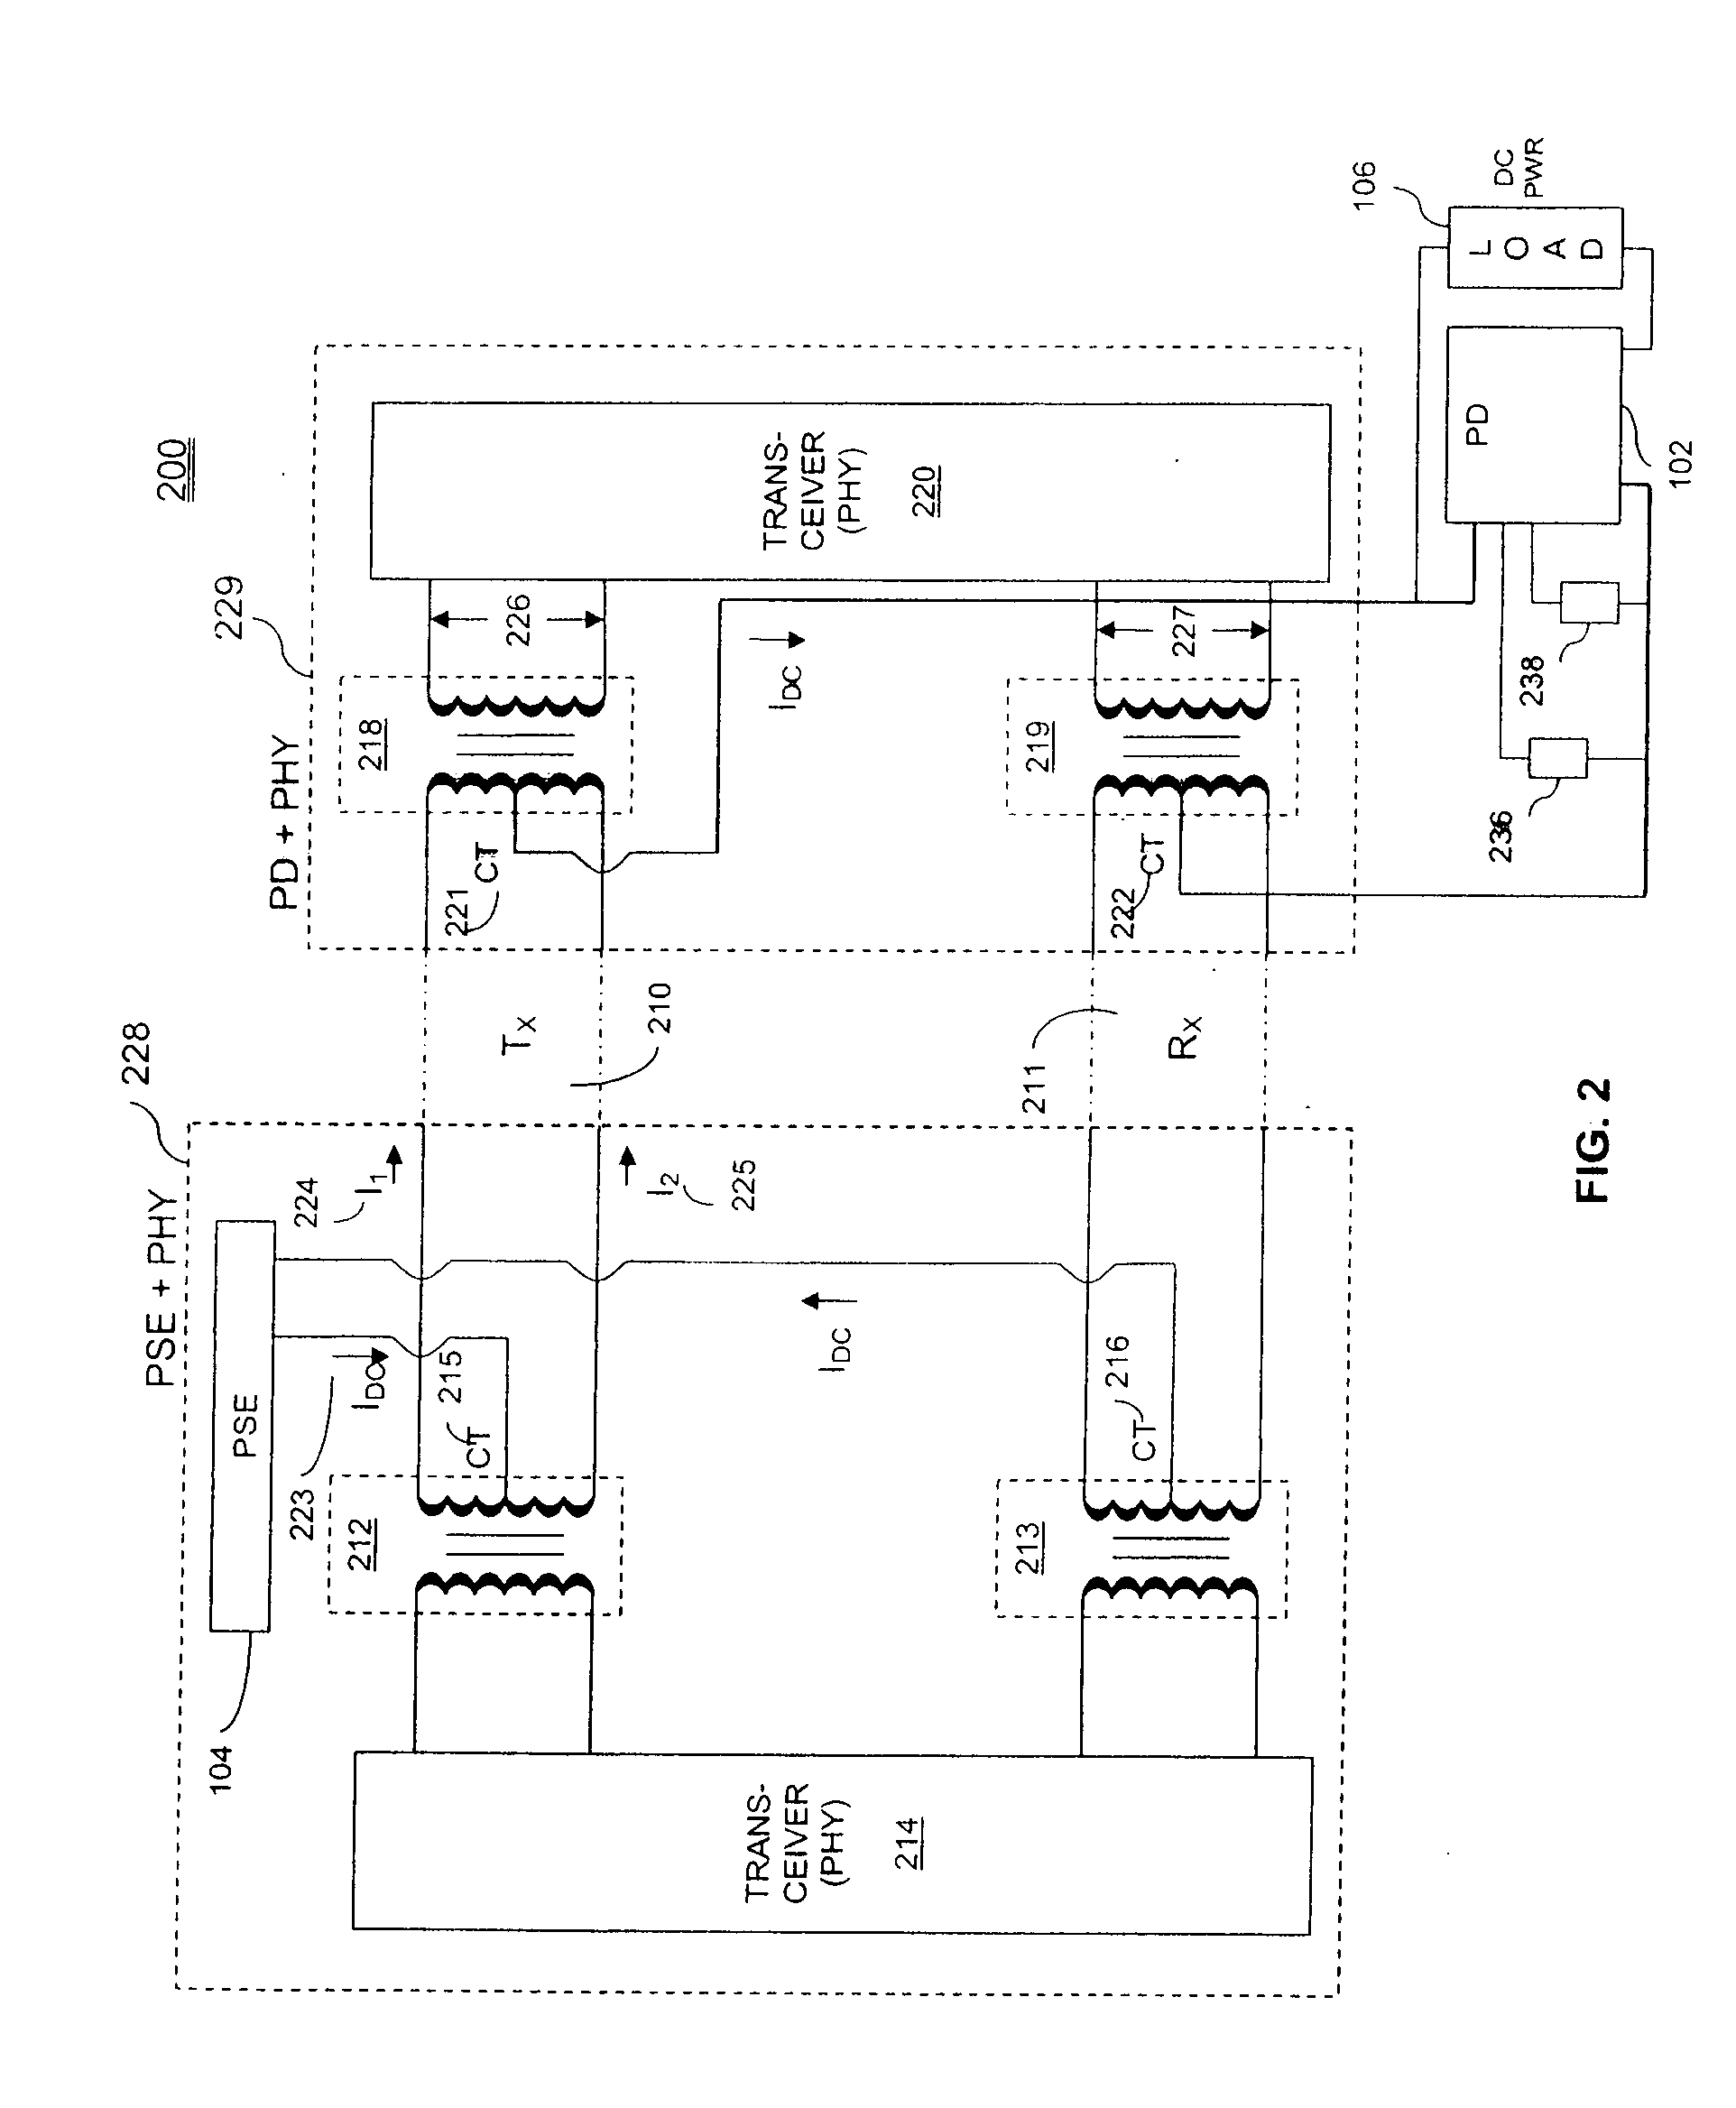 Powered device power classification with increased current limit